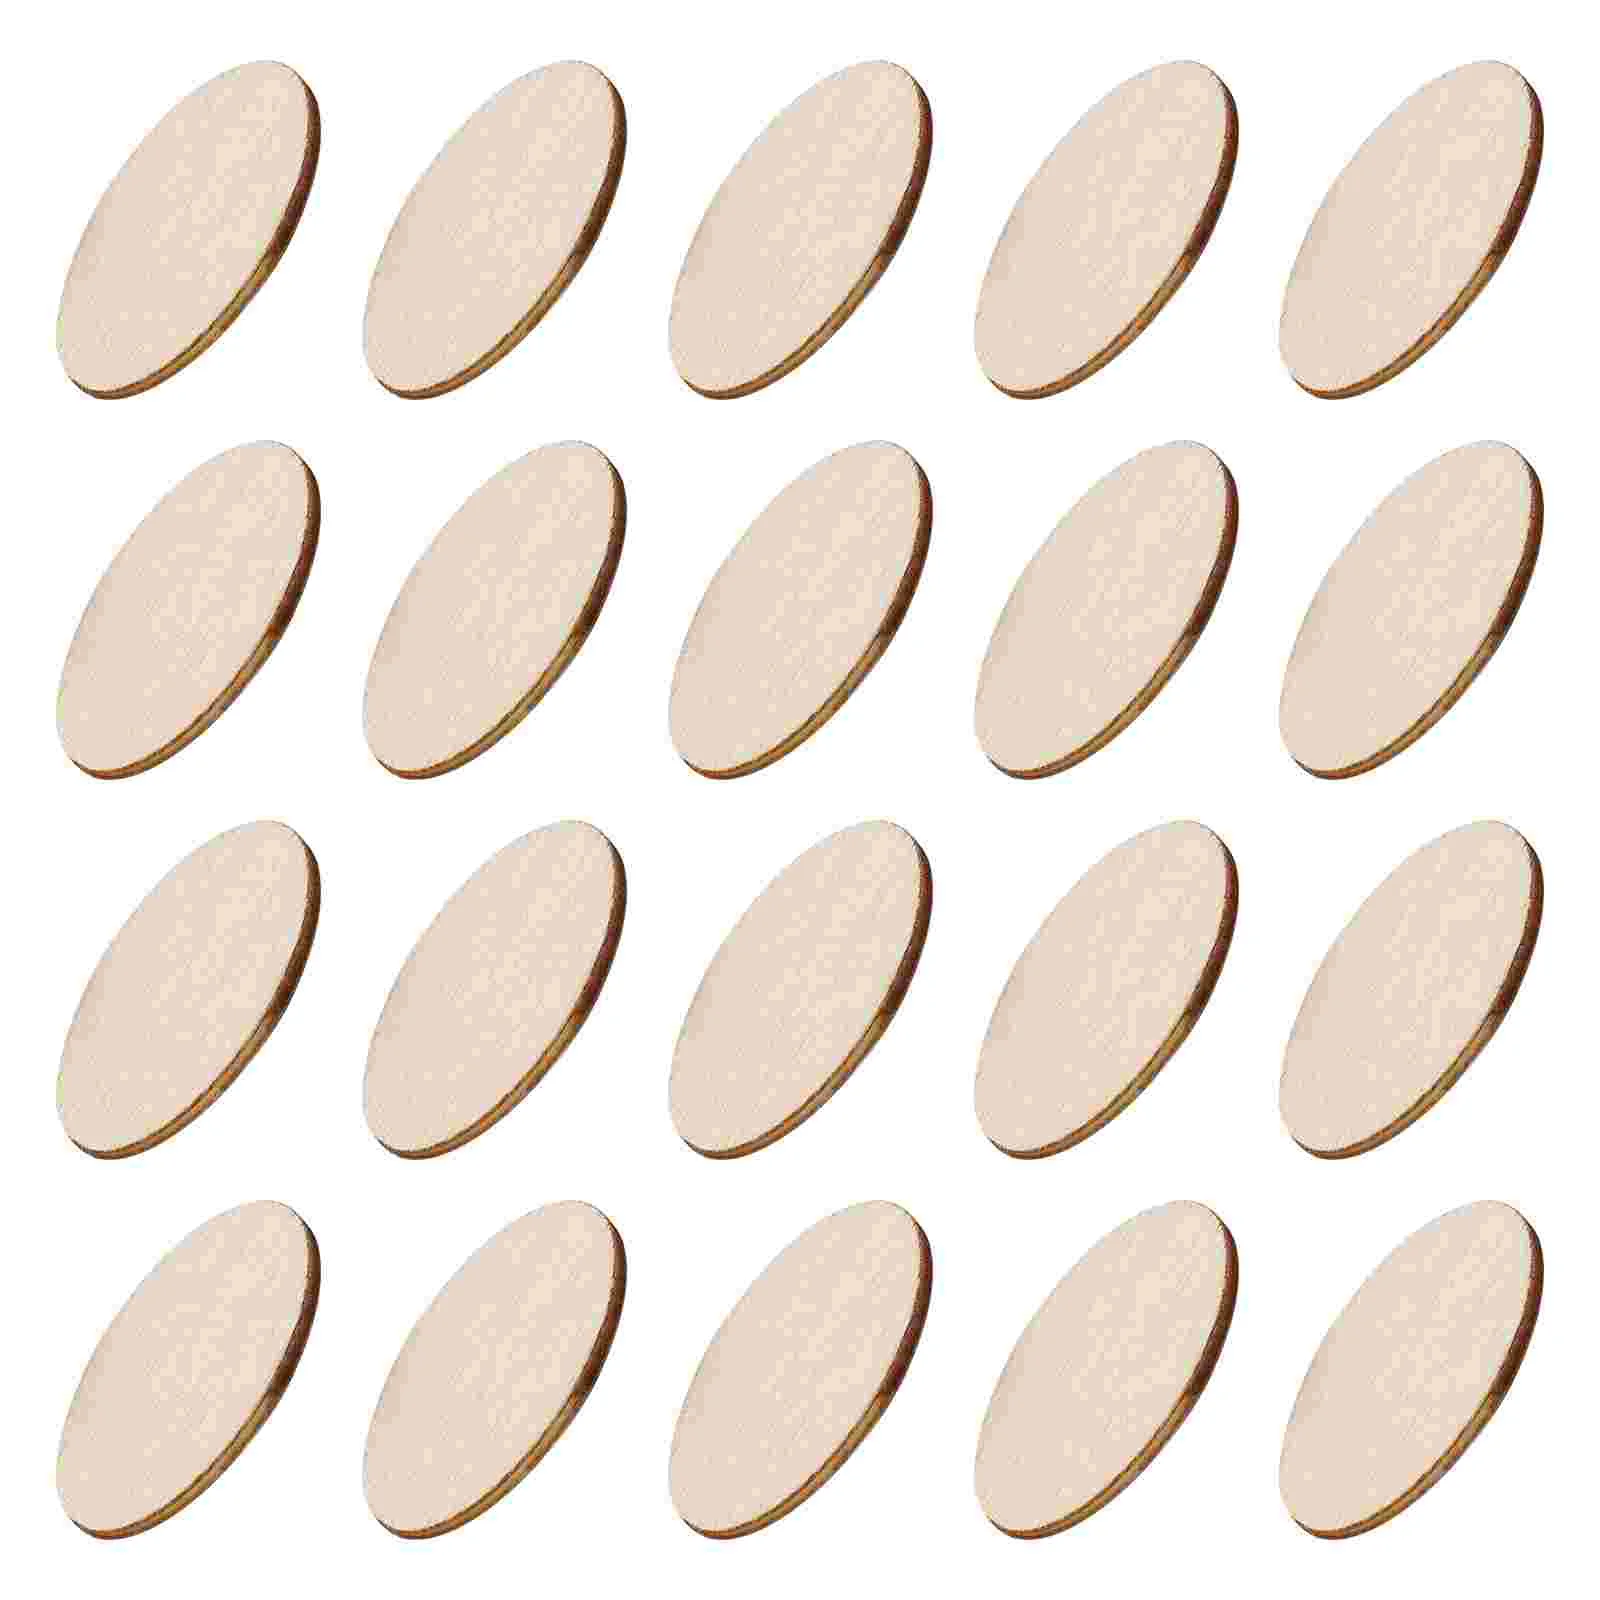 

NUOBESTY 200pcs Unfinished Wood Oval Slices Natural Rustic Wooden Cutout Oval Wood Chips for DIY Craft Decoration